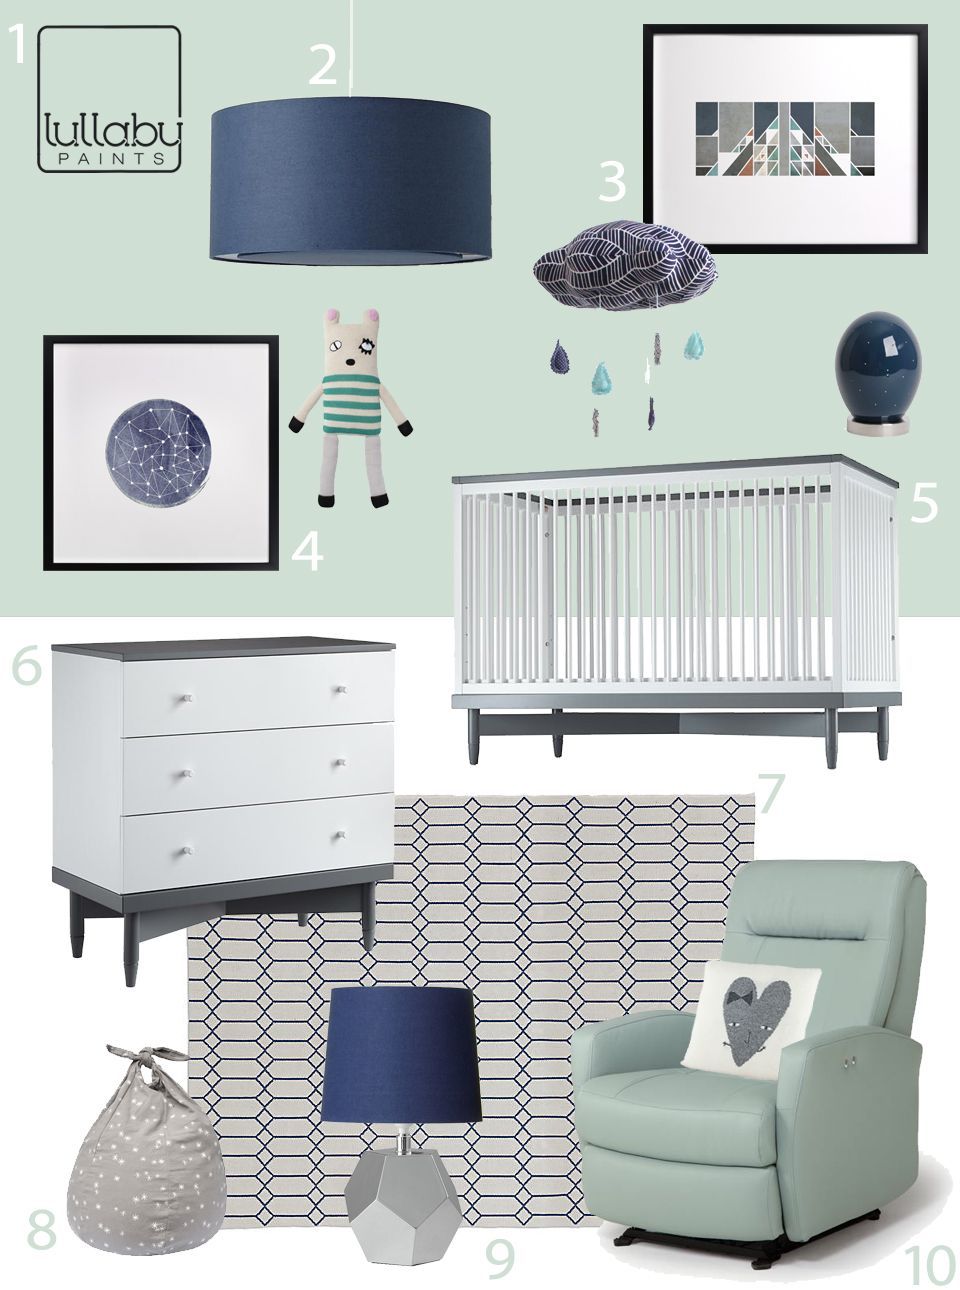 My Modern Nursery #71: Cool and Calm in Aqua and Navy